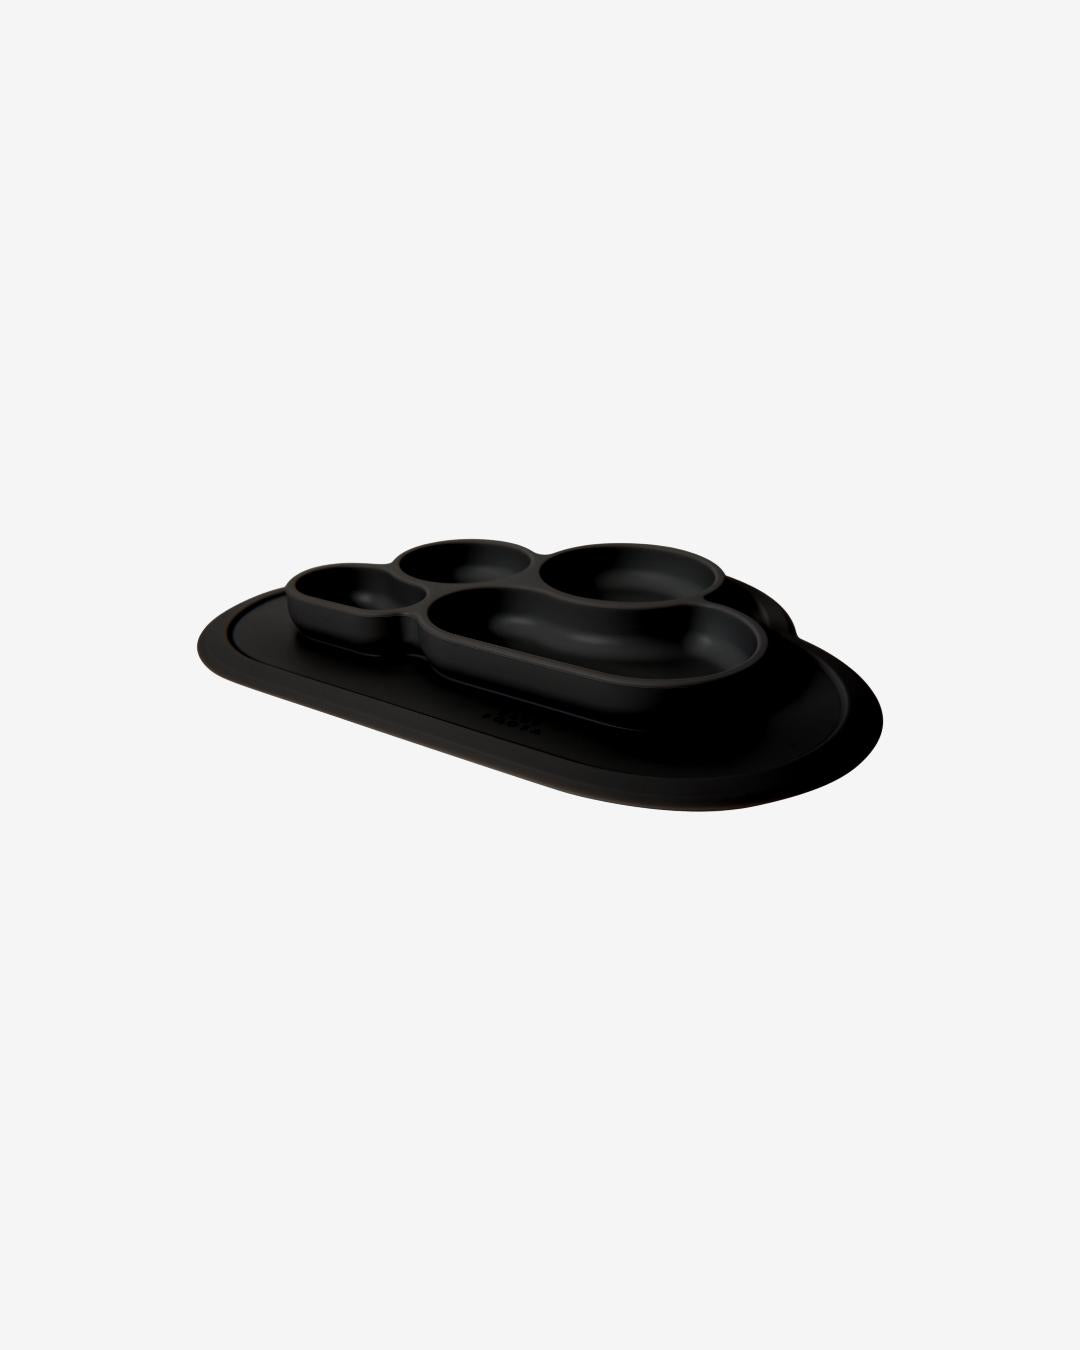 Weaning Cloud Plate Mat | Grippy Suction | Non-slip | Catch-food | Side scoops | Easy clean (Milano Black)